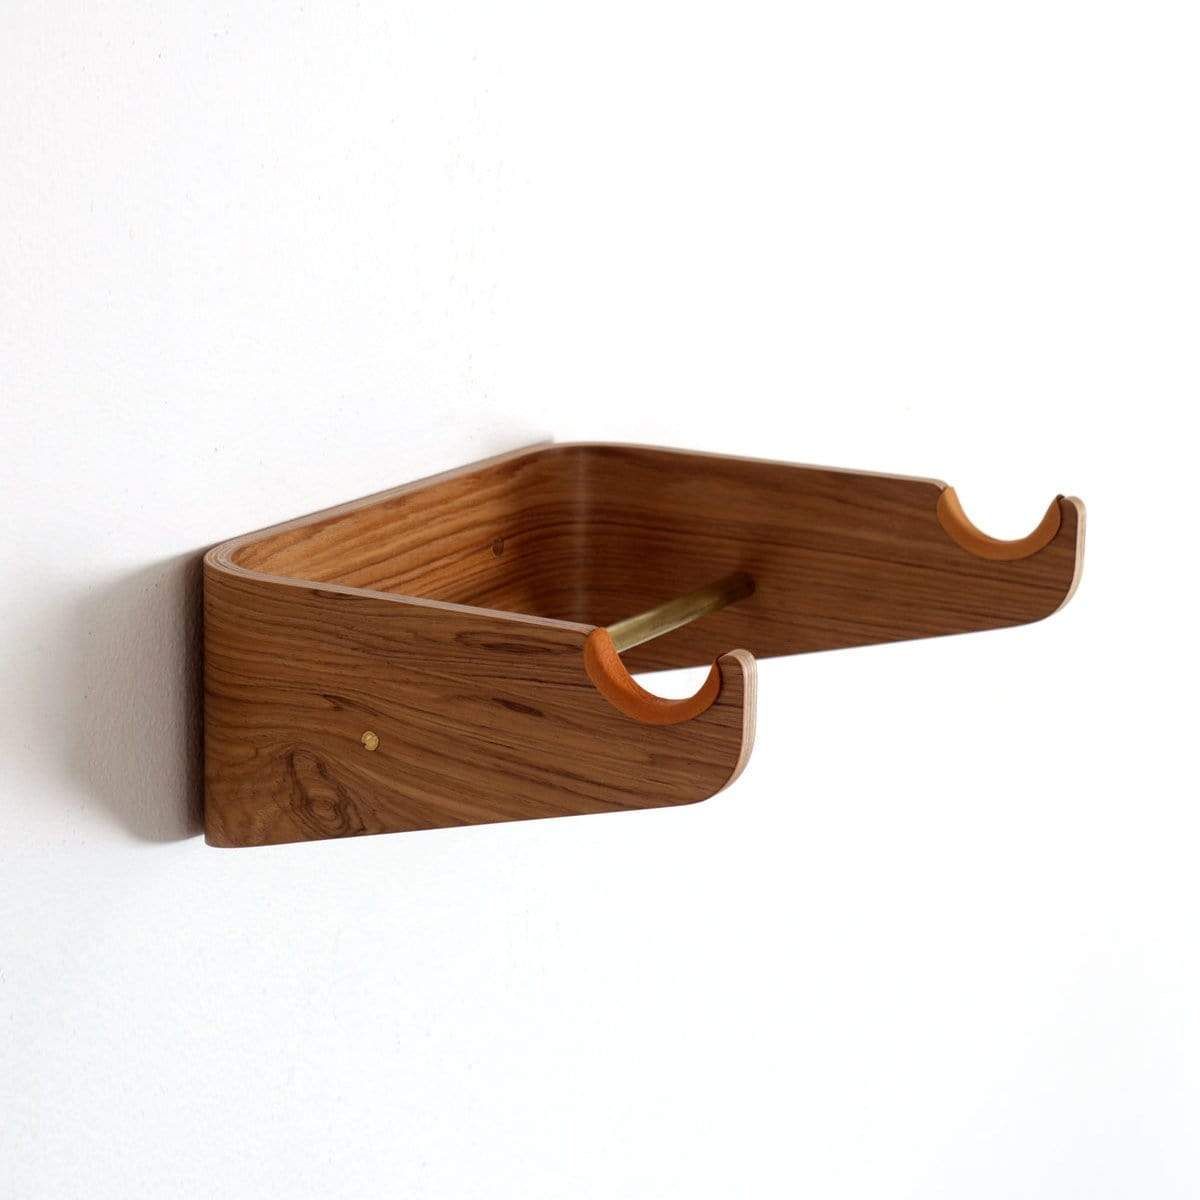 Angled side of a wooden wall hanger for bikes